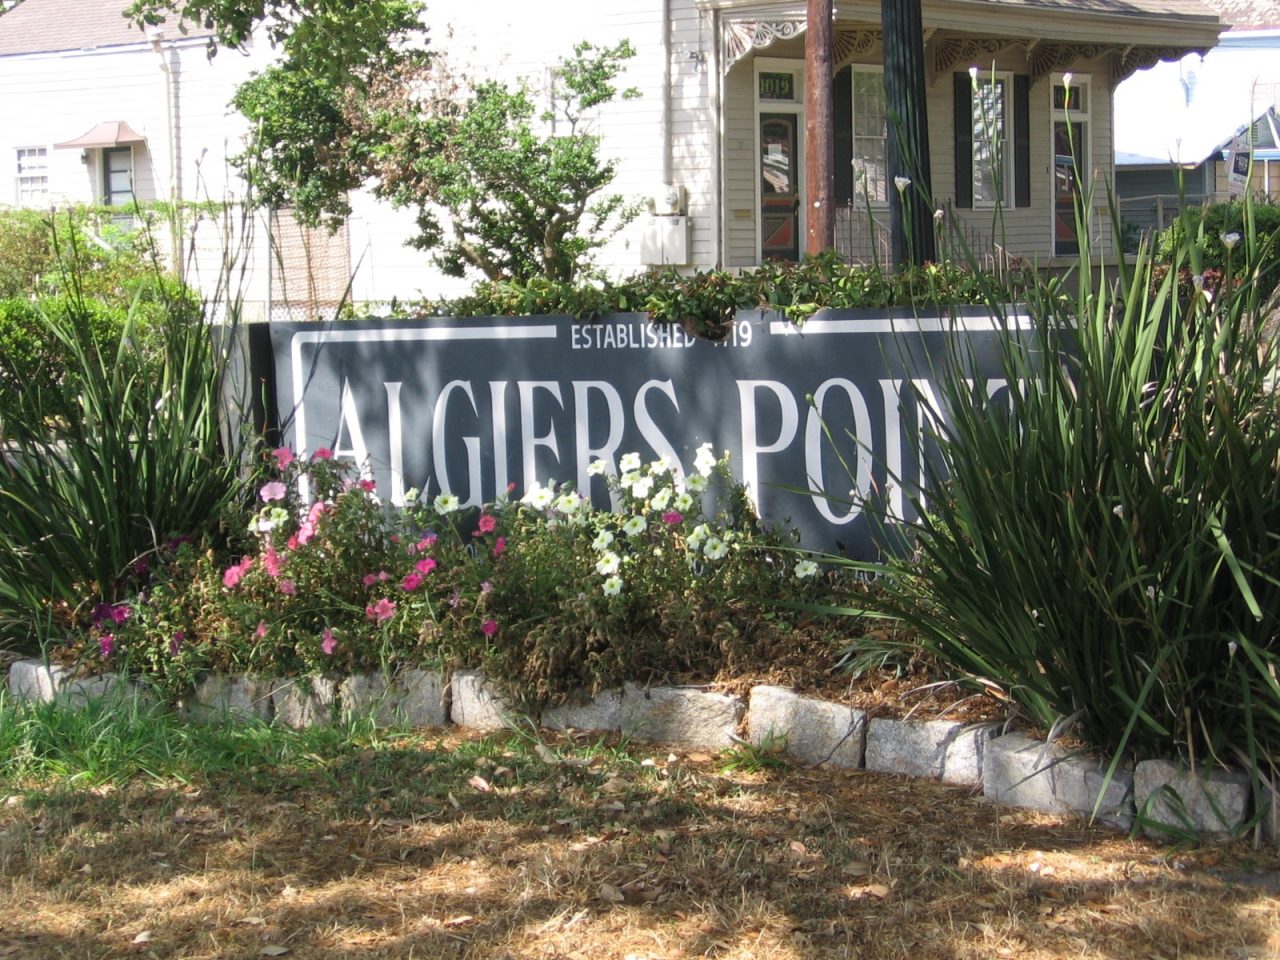 Algiers Point home prices